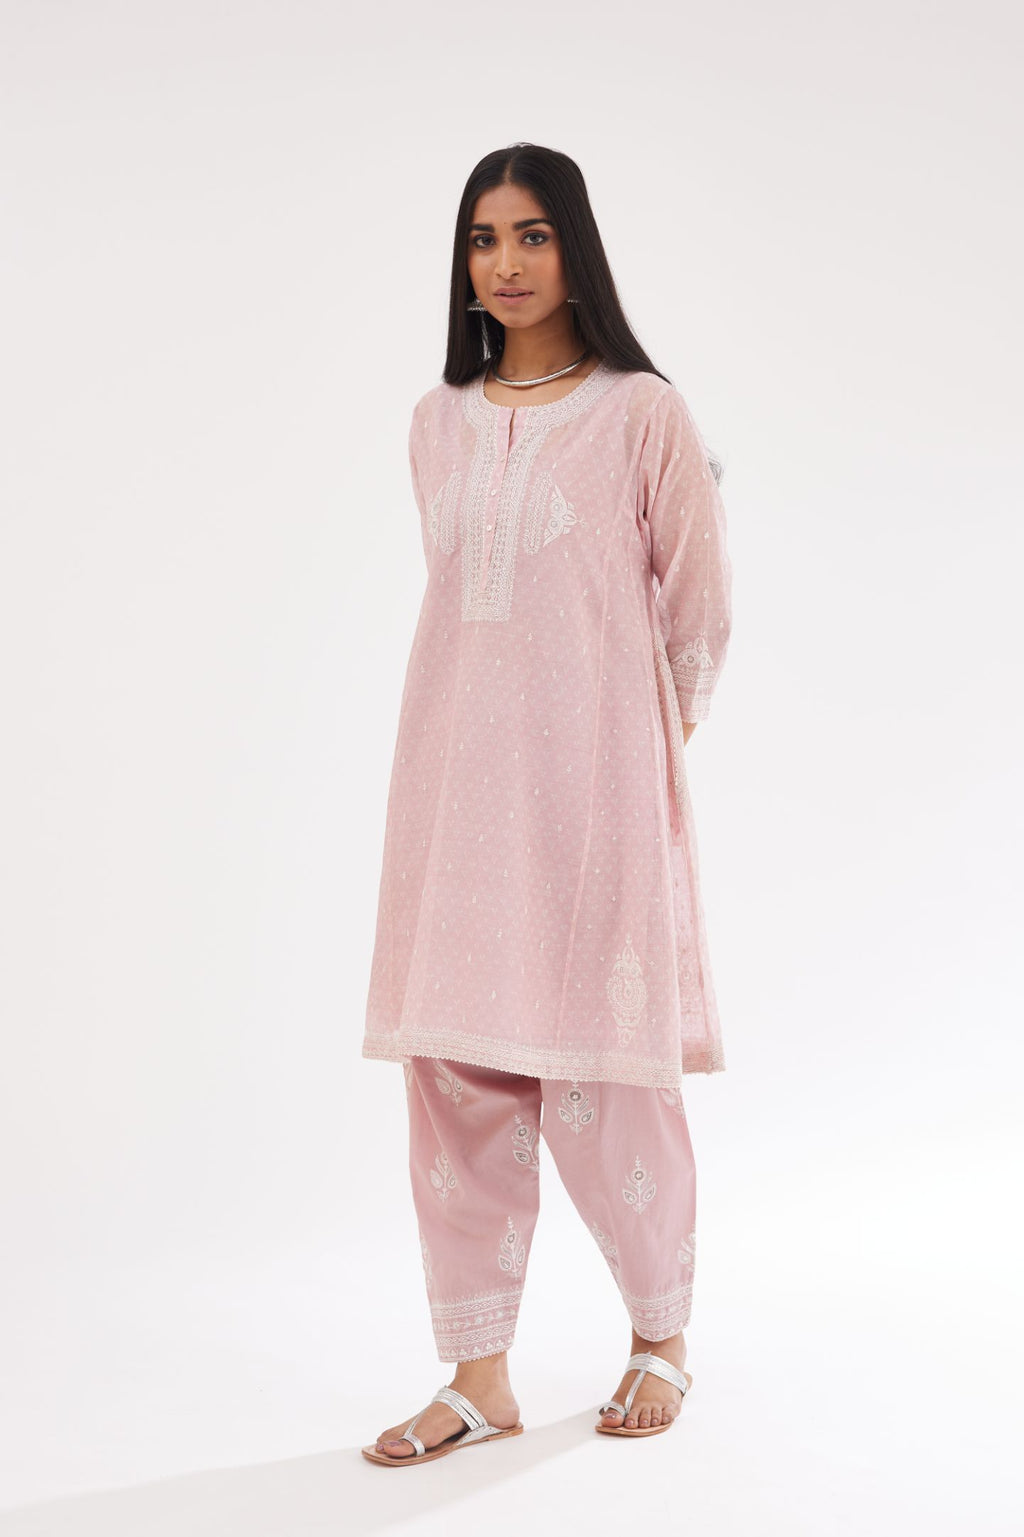 Pink cotton chanderi hand block printed short kalidar phiran style kurta set with button placket neckline and dori and silk thraed embroidery all over.